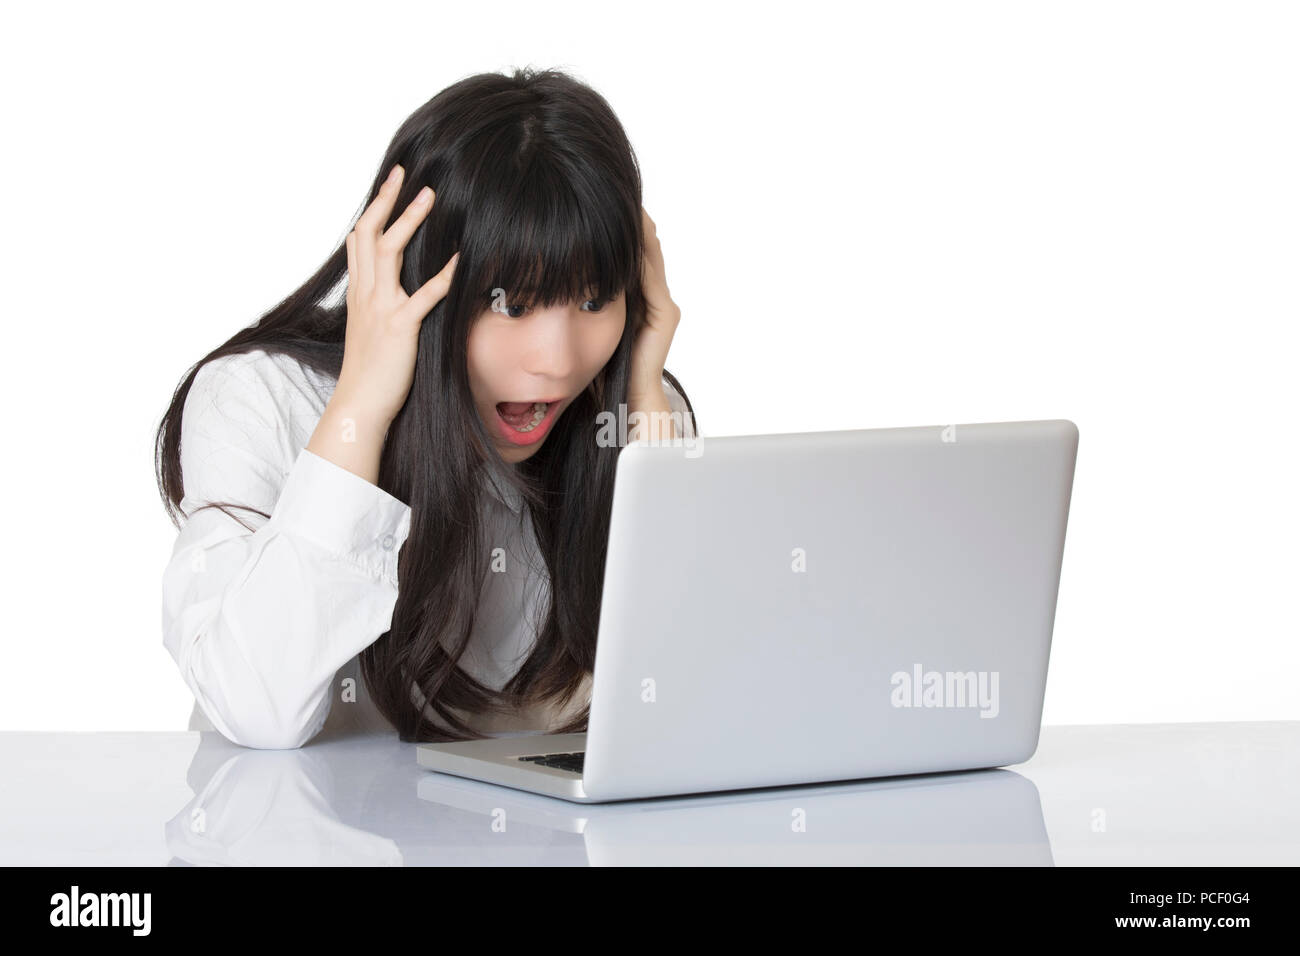 Beautiful Asian woman sitting at desk very stressed out isolated on a white background Stock Photo